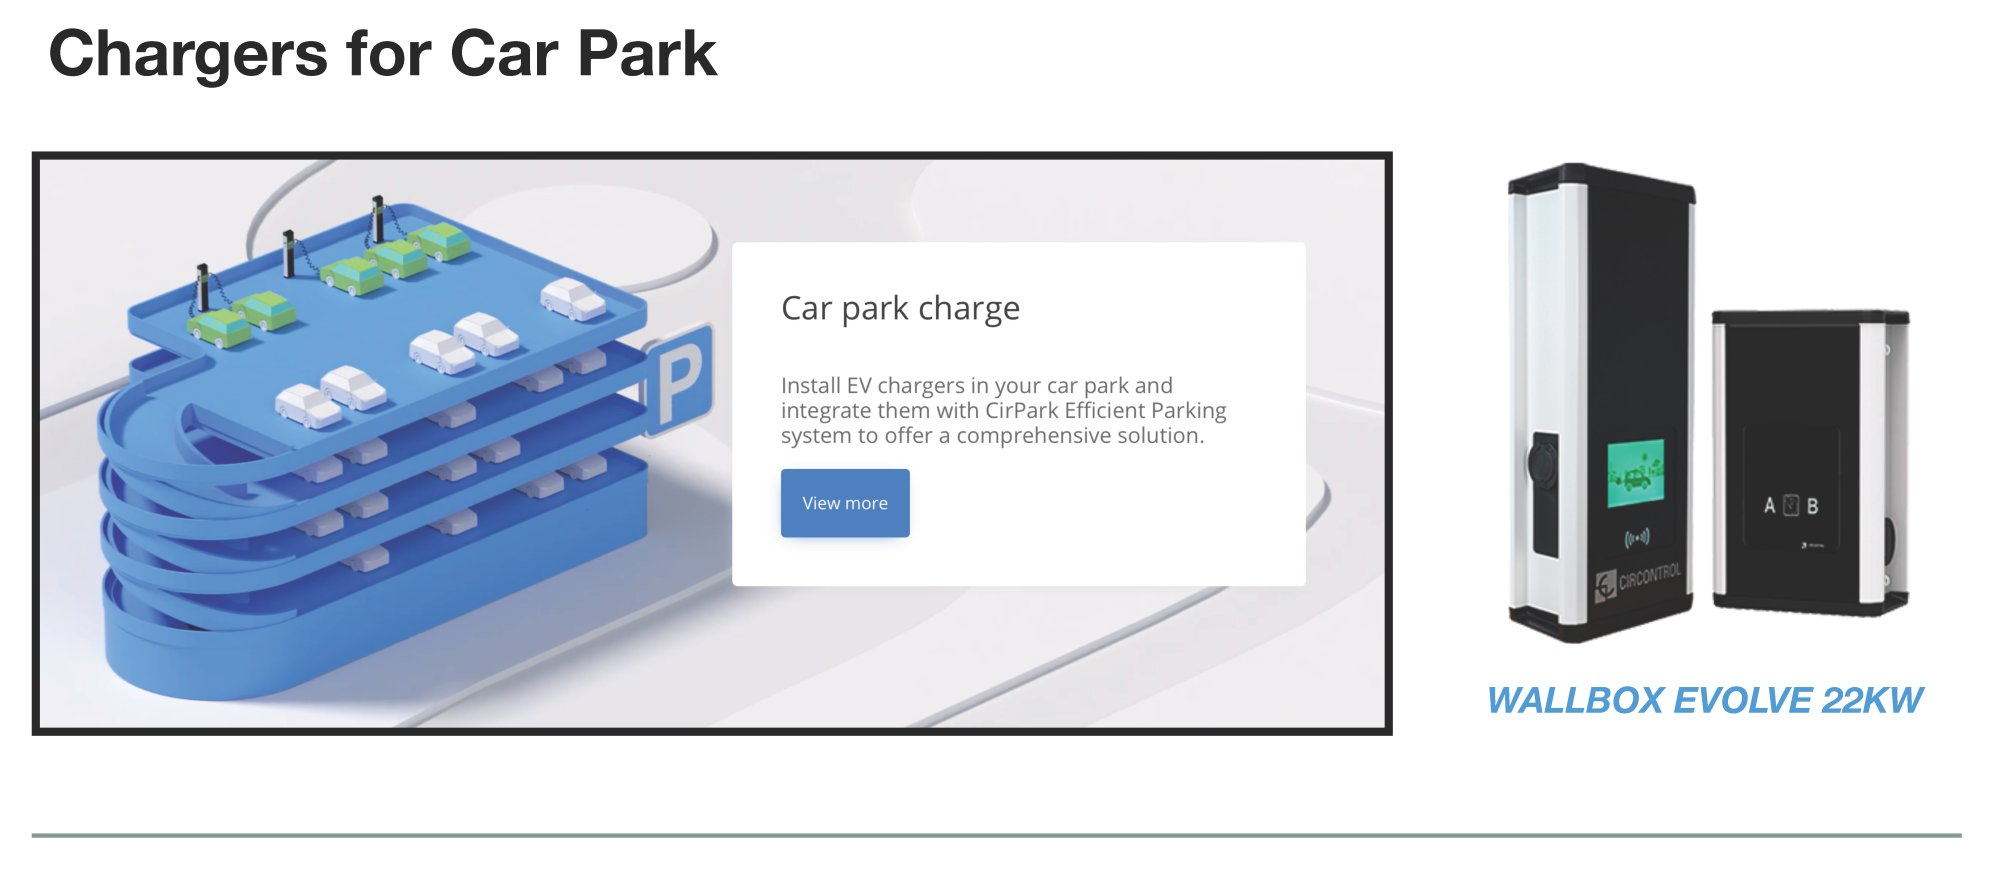 Chargers for Car park